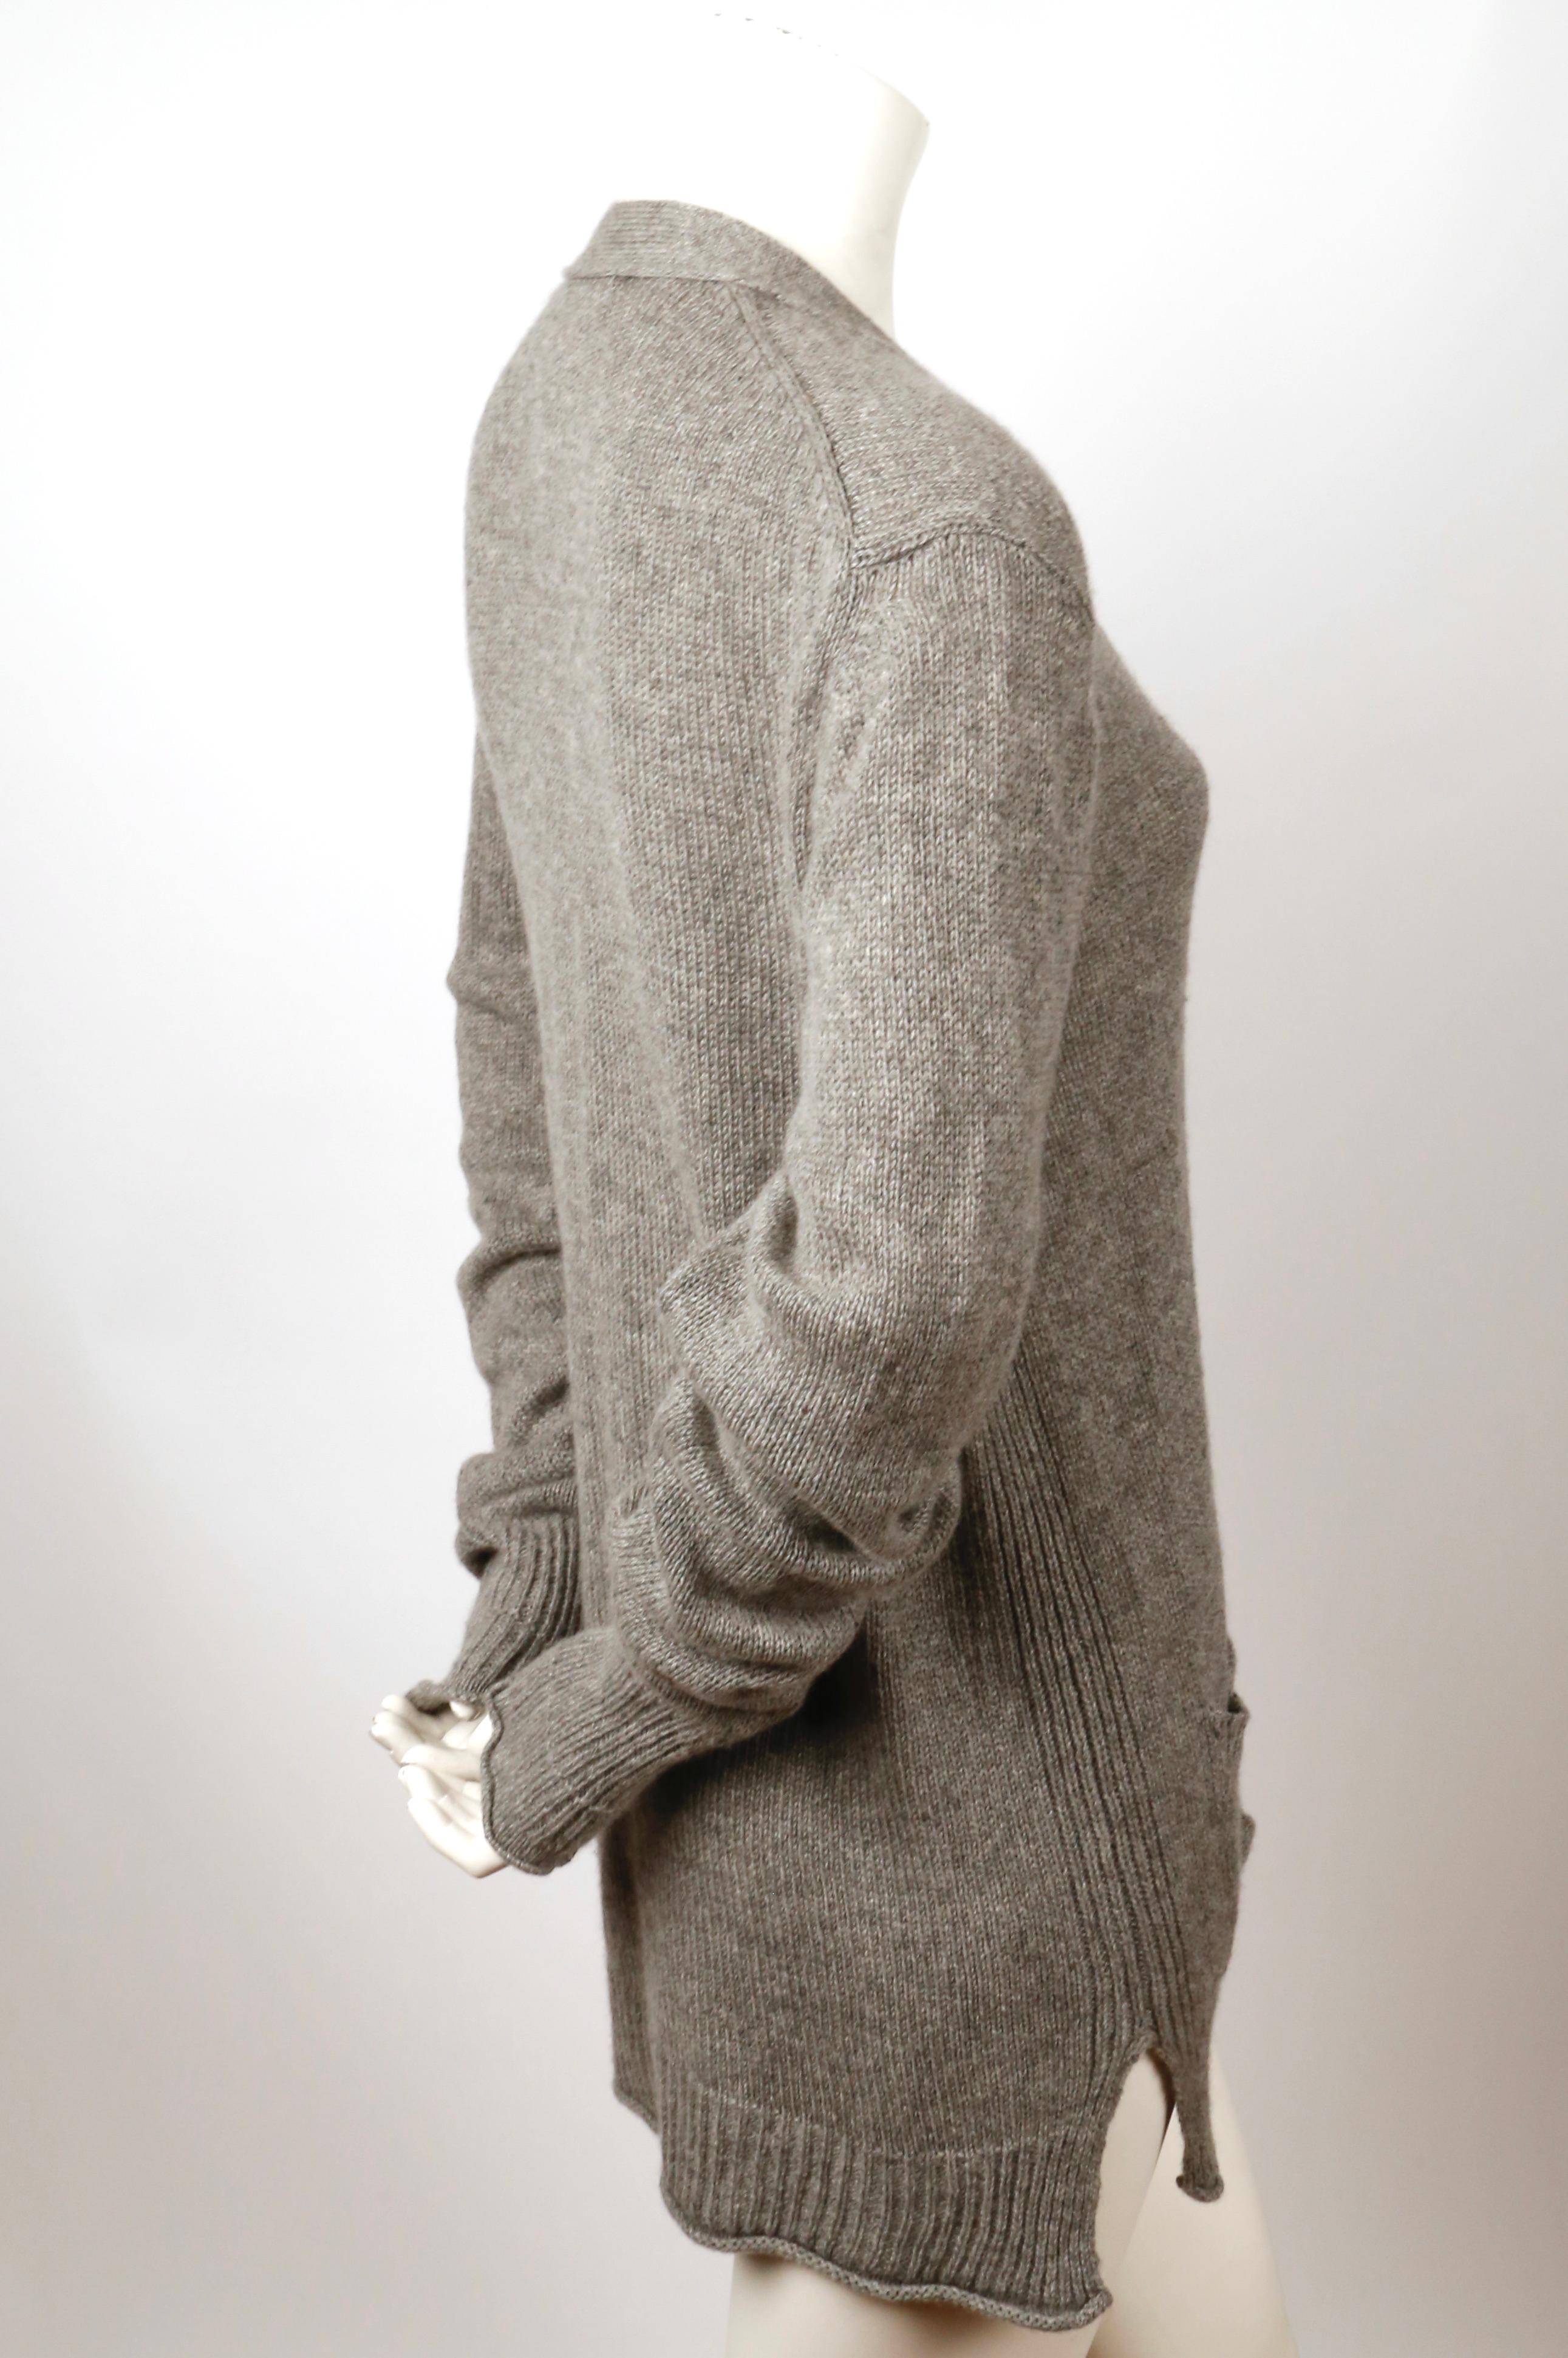 Heathered-grey, cashmere cardigan designed by Phoebe Philo for Celine. Lightweight knit.  Size 'M'.  Approximate measurements: (unstretched): shoulders 16